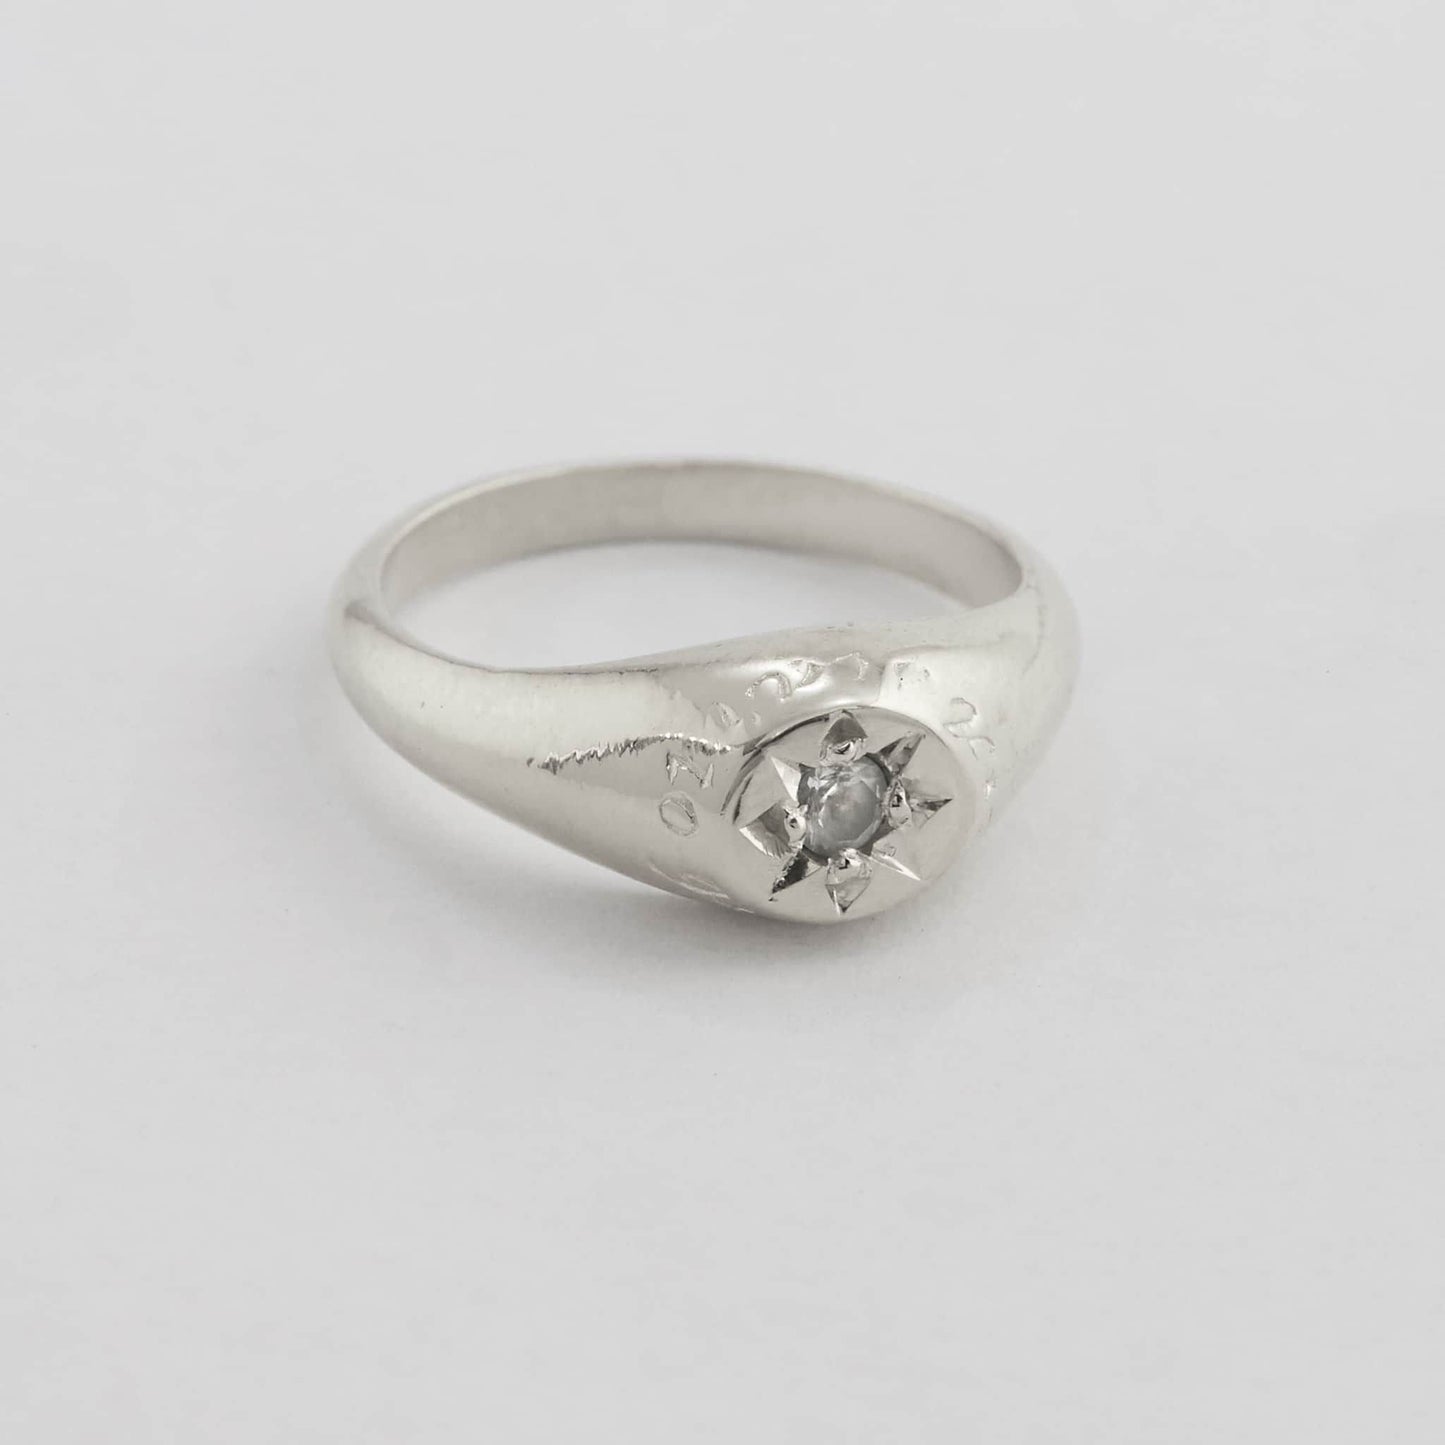 'A Star to Guide Me' White Topaz Signet Ring